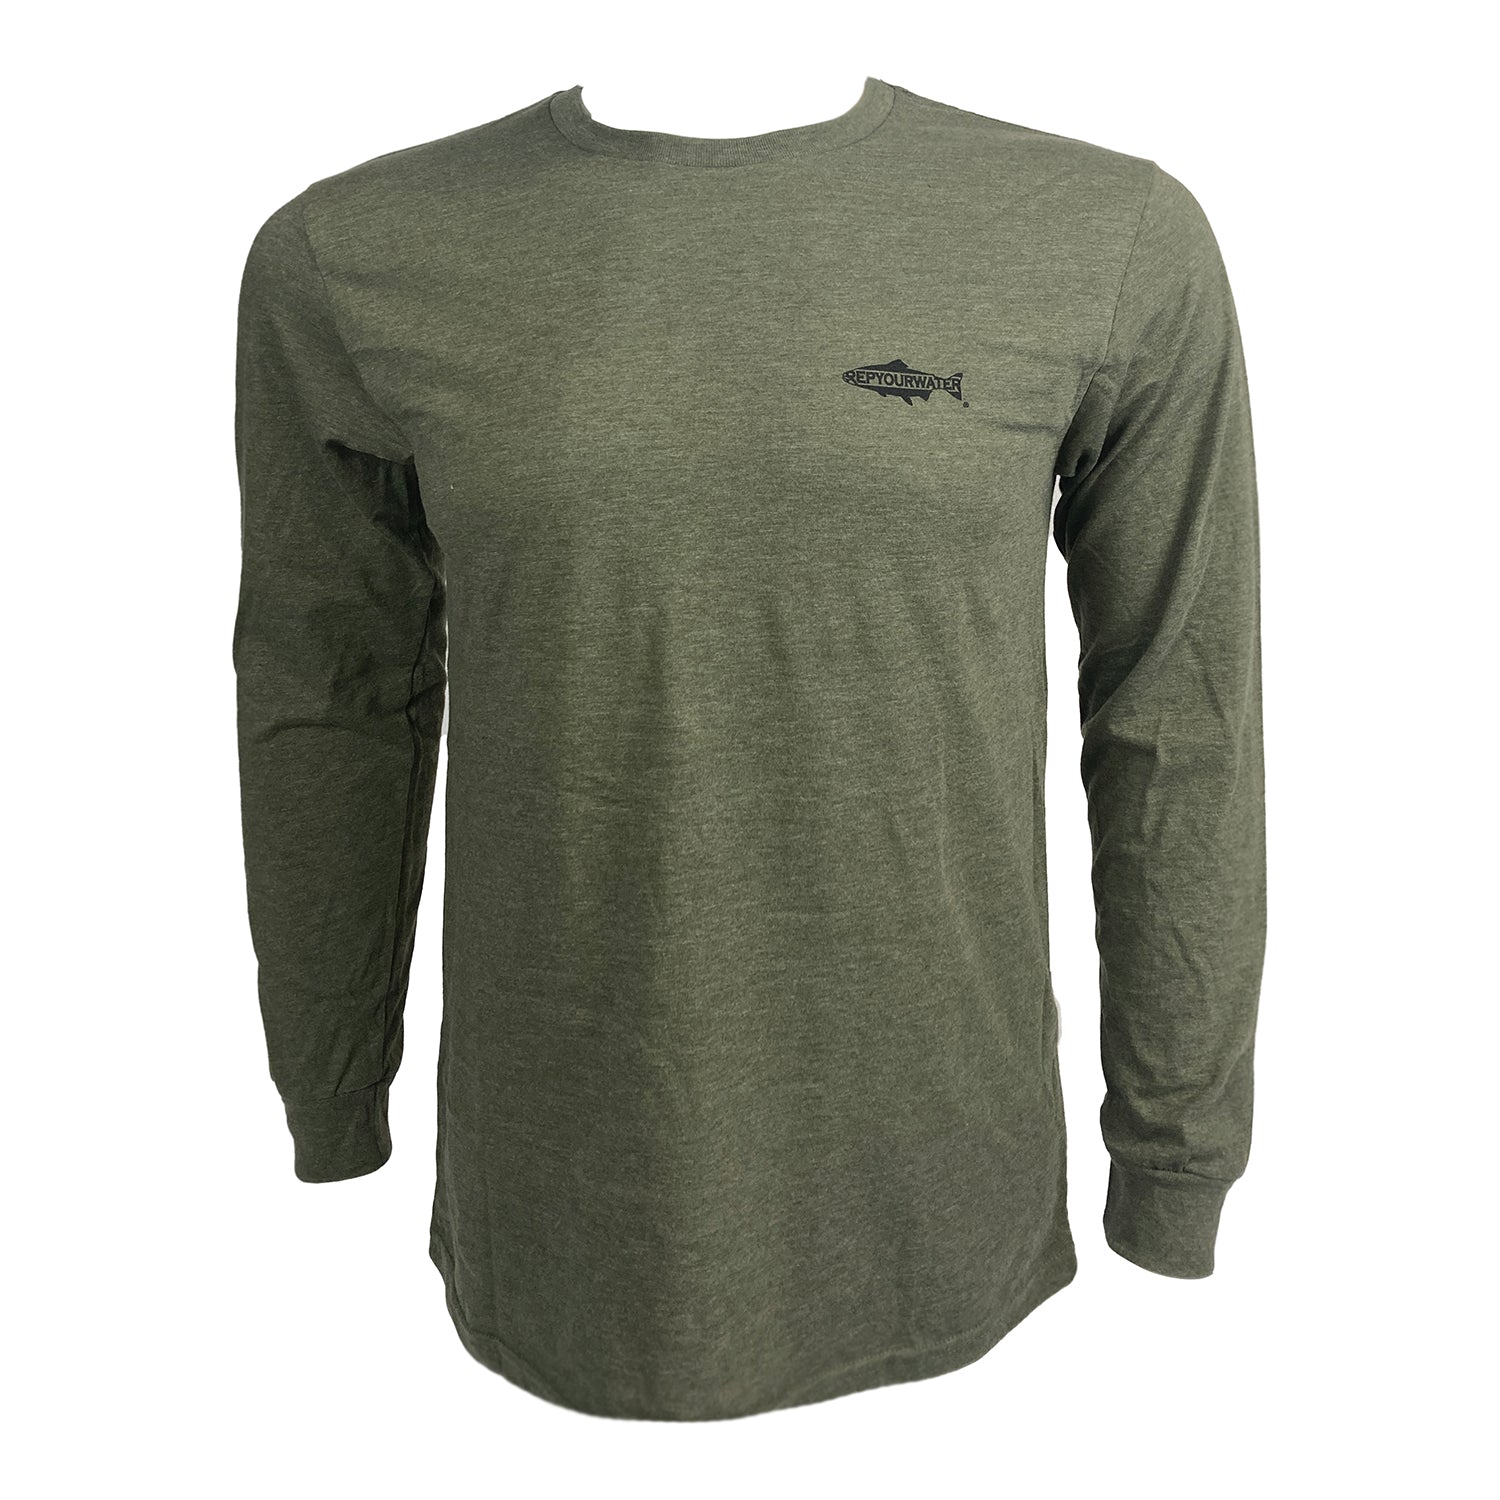 Green long sleeved tee shown from the front with Rep Your Water logo on wearer's left chest.